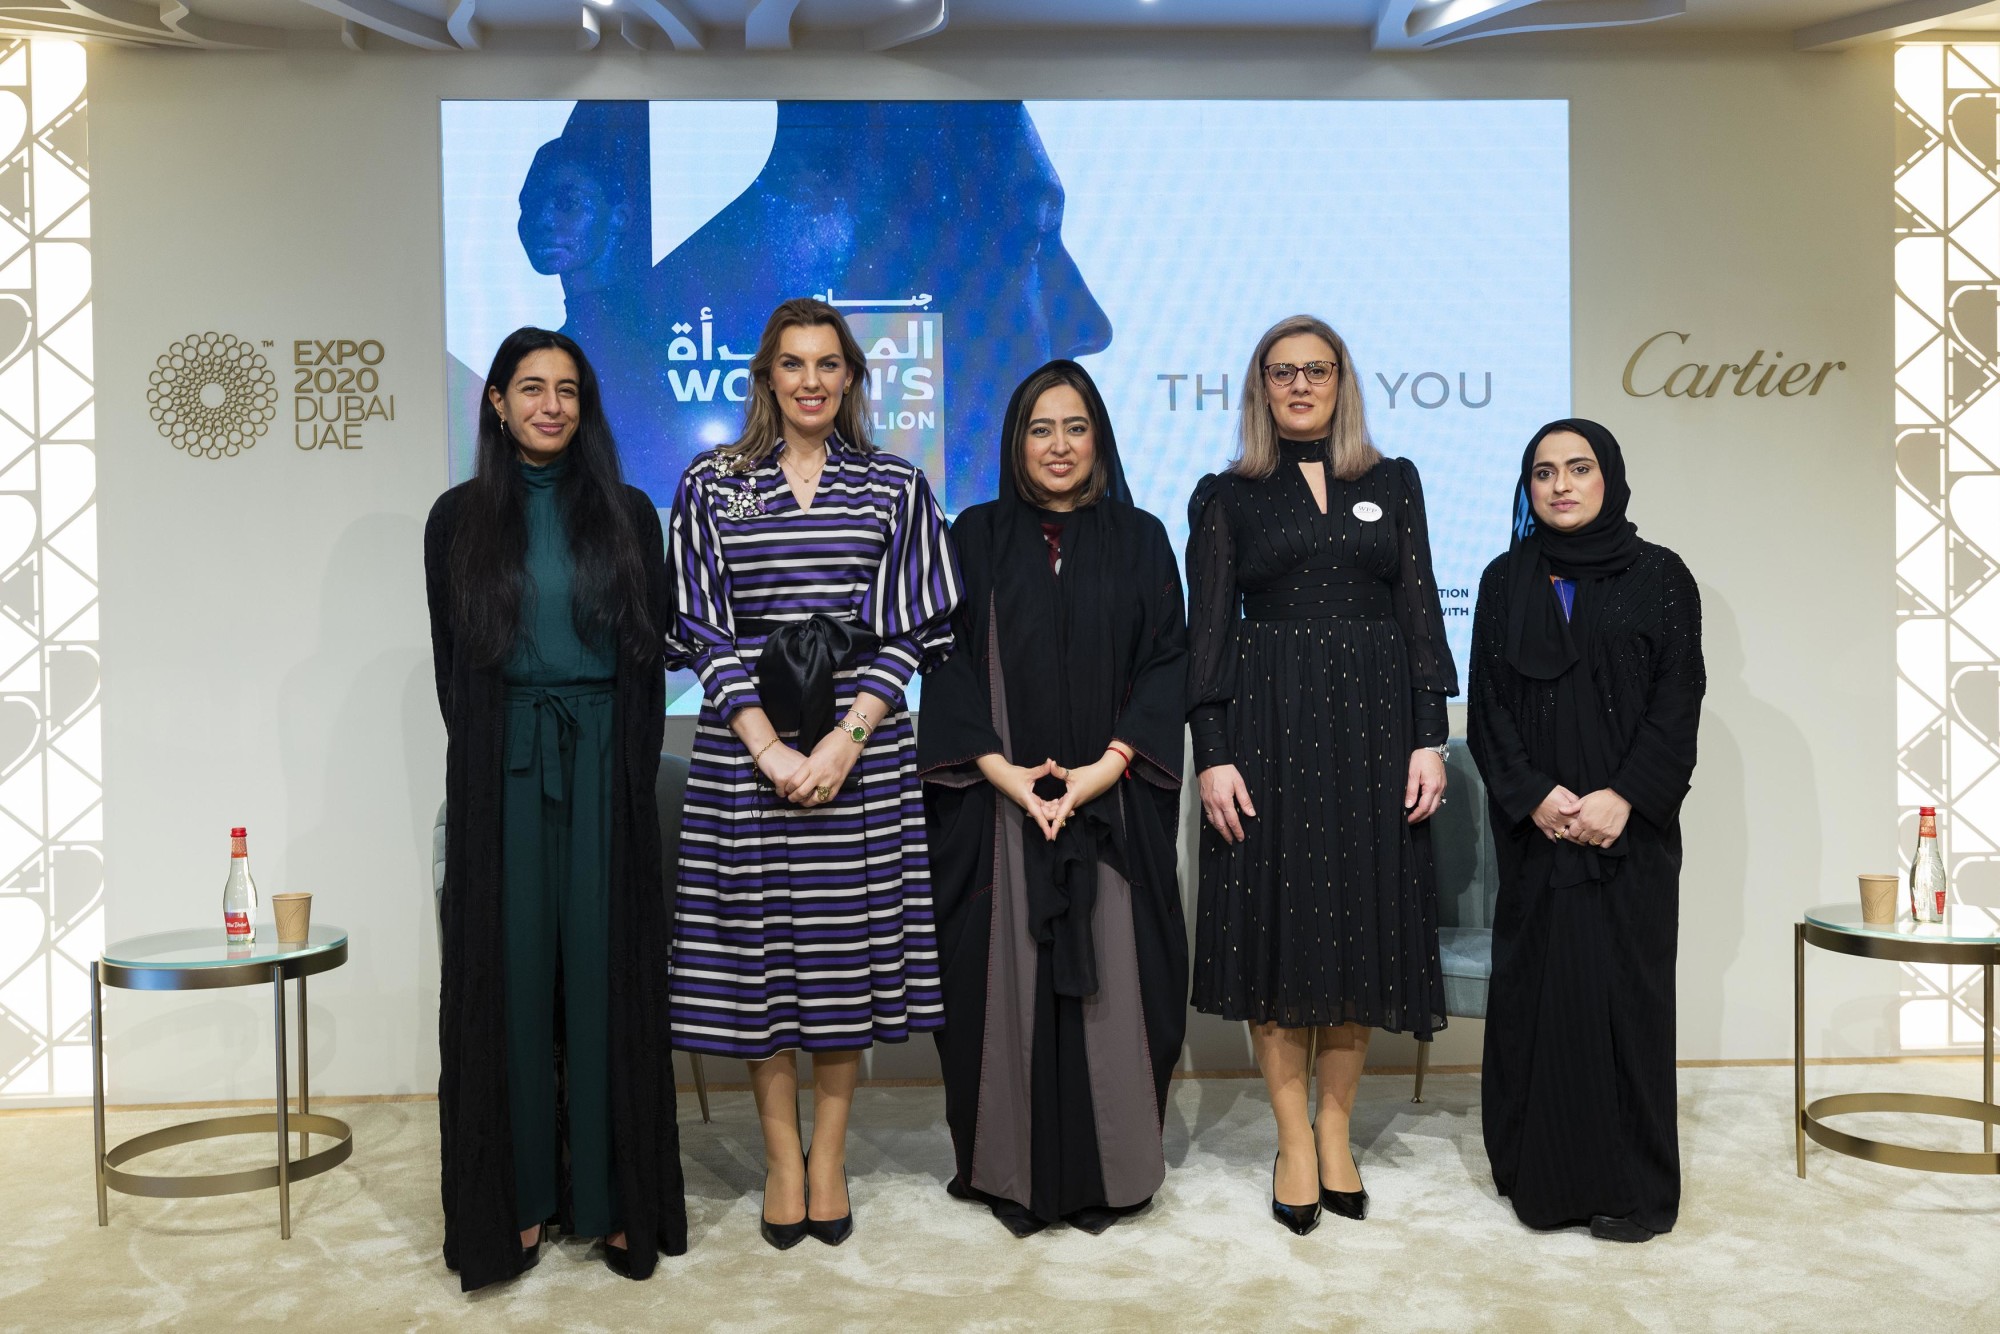 A group photo with Her Excellency Fatmire Isaki (R2), Deputy Minister of Foreign Affairs Republic of North Macedonia and Maryam Abdulla Mohd Ketait (C), moderator during Visions and Journeys Fatmire Isaki at the Women-s Pavilion m32253